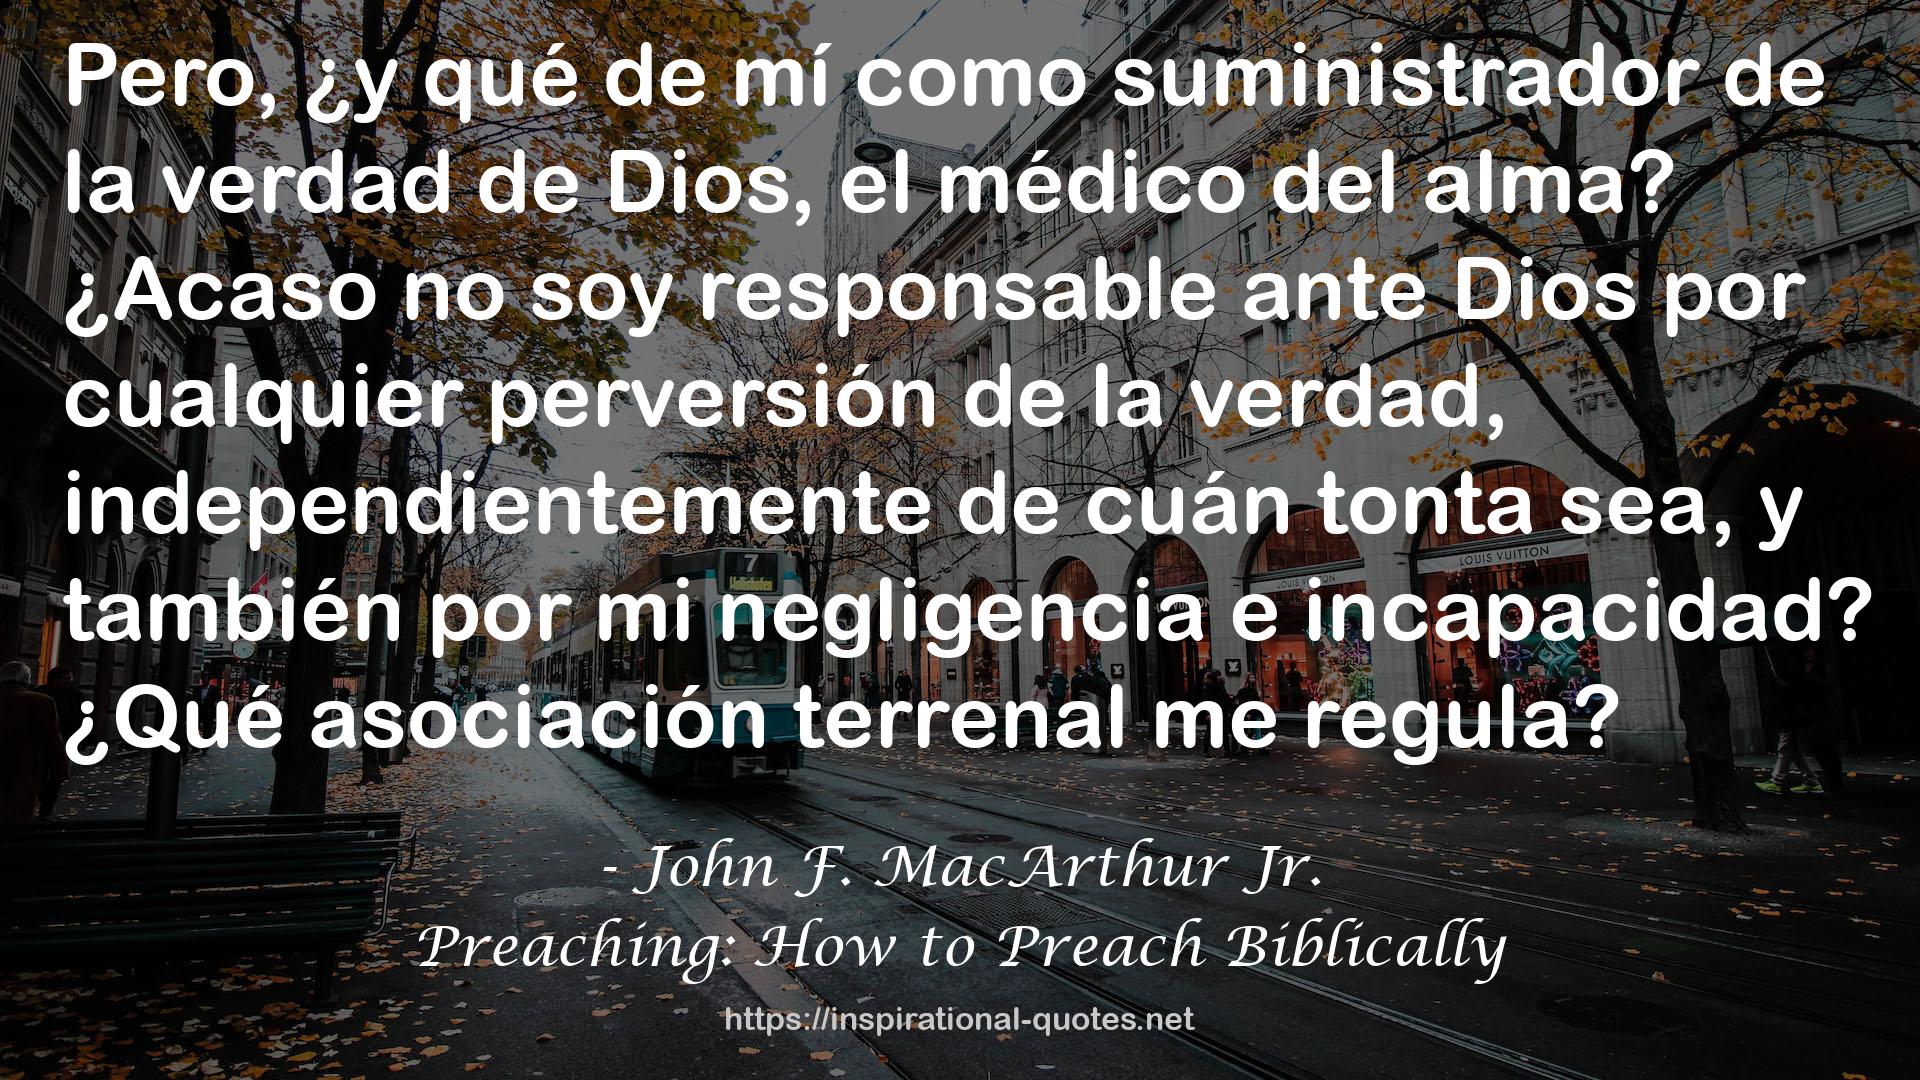 Preaching: How to Preach Biblically QUOTES